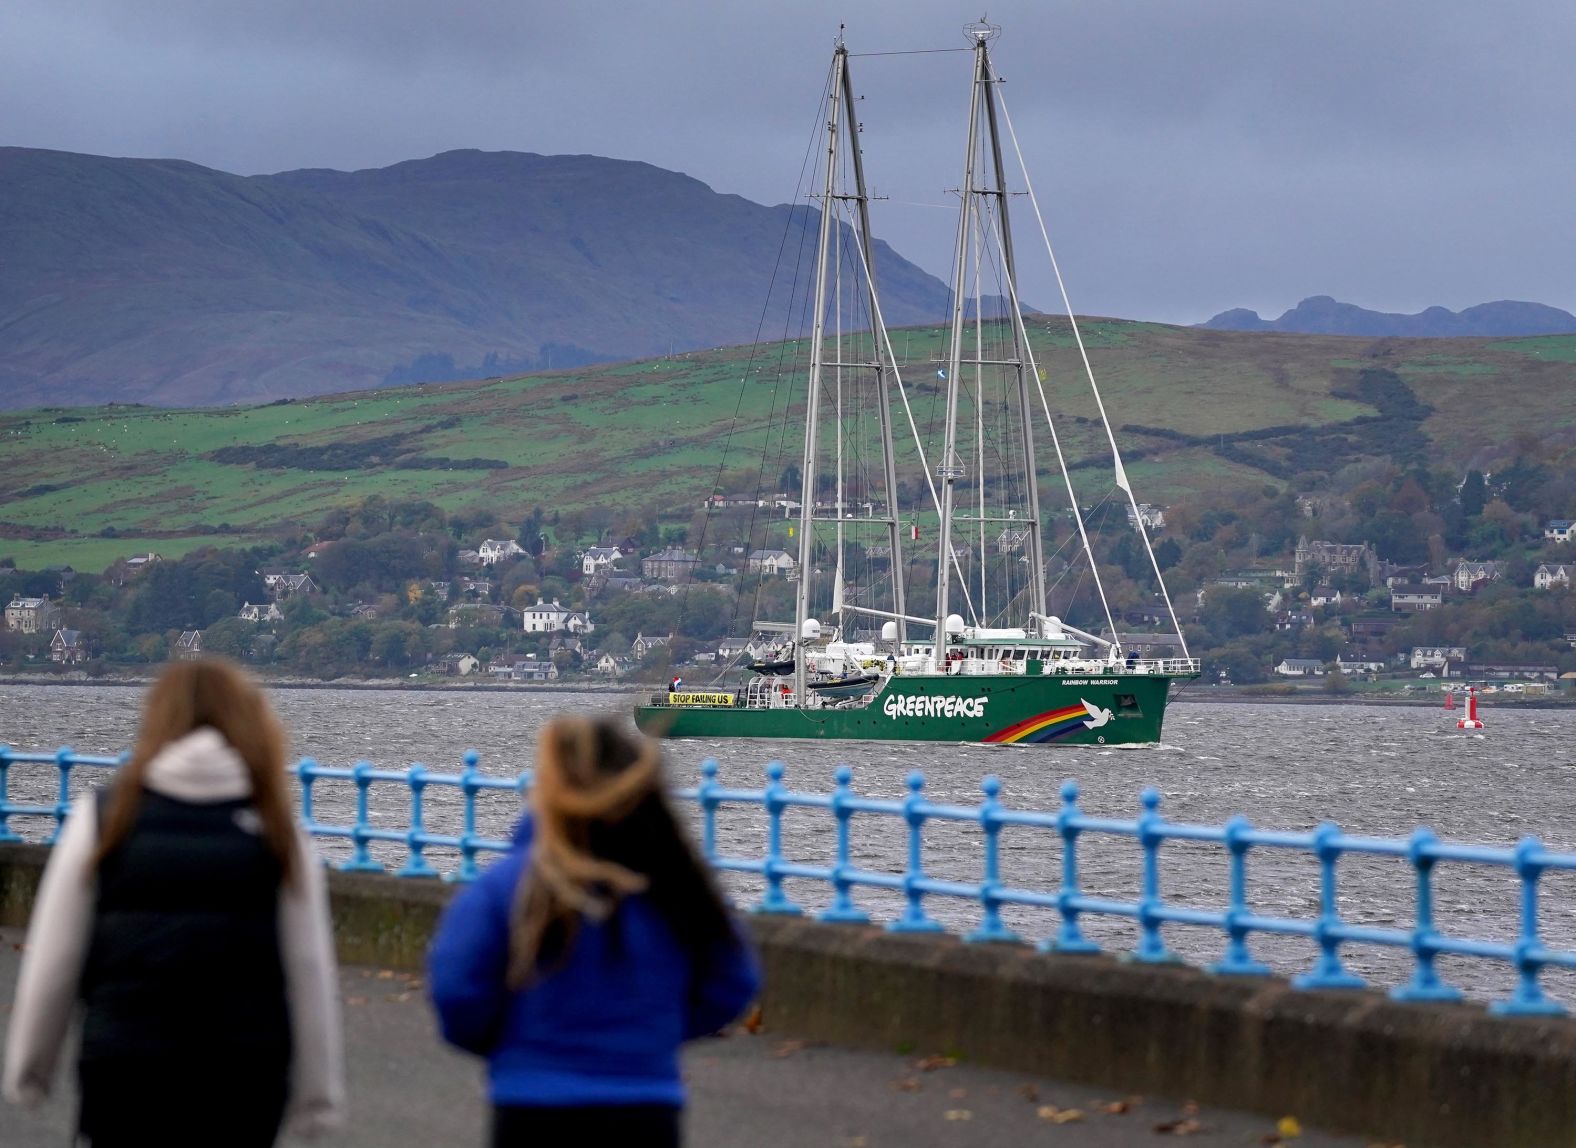 The Greenpeace ship Rainbow Warrior makes its way up the River Clyde, near Greenock, Scotland, on the first day of COP26. The ship was carrying four young climate activists from areas affected by climate change.